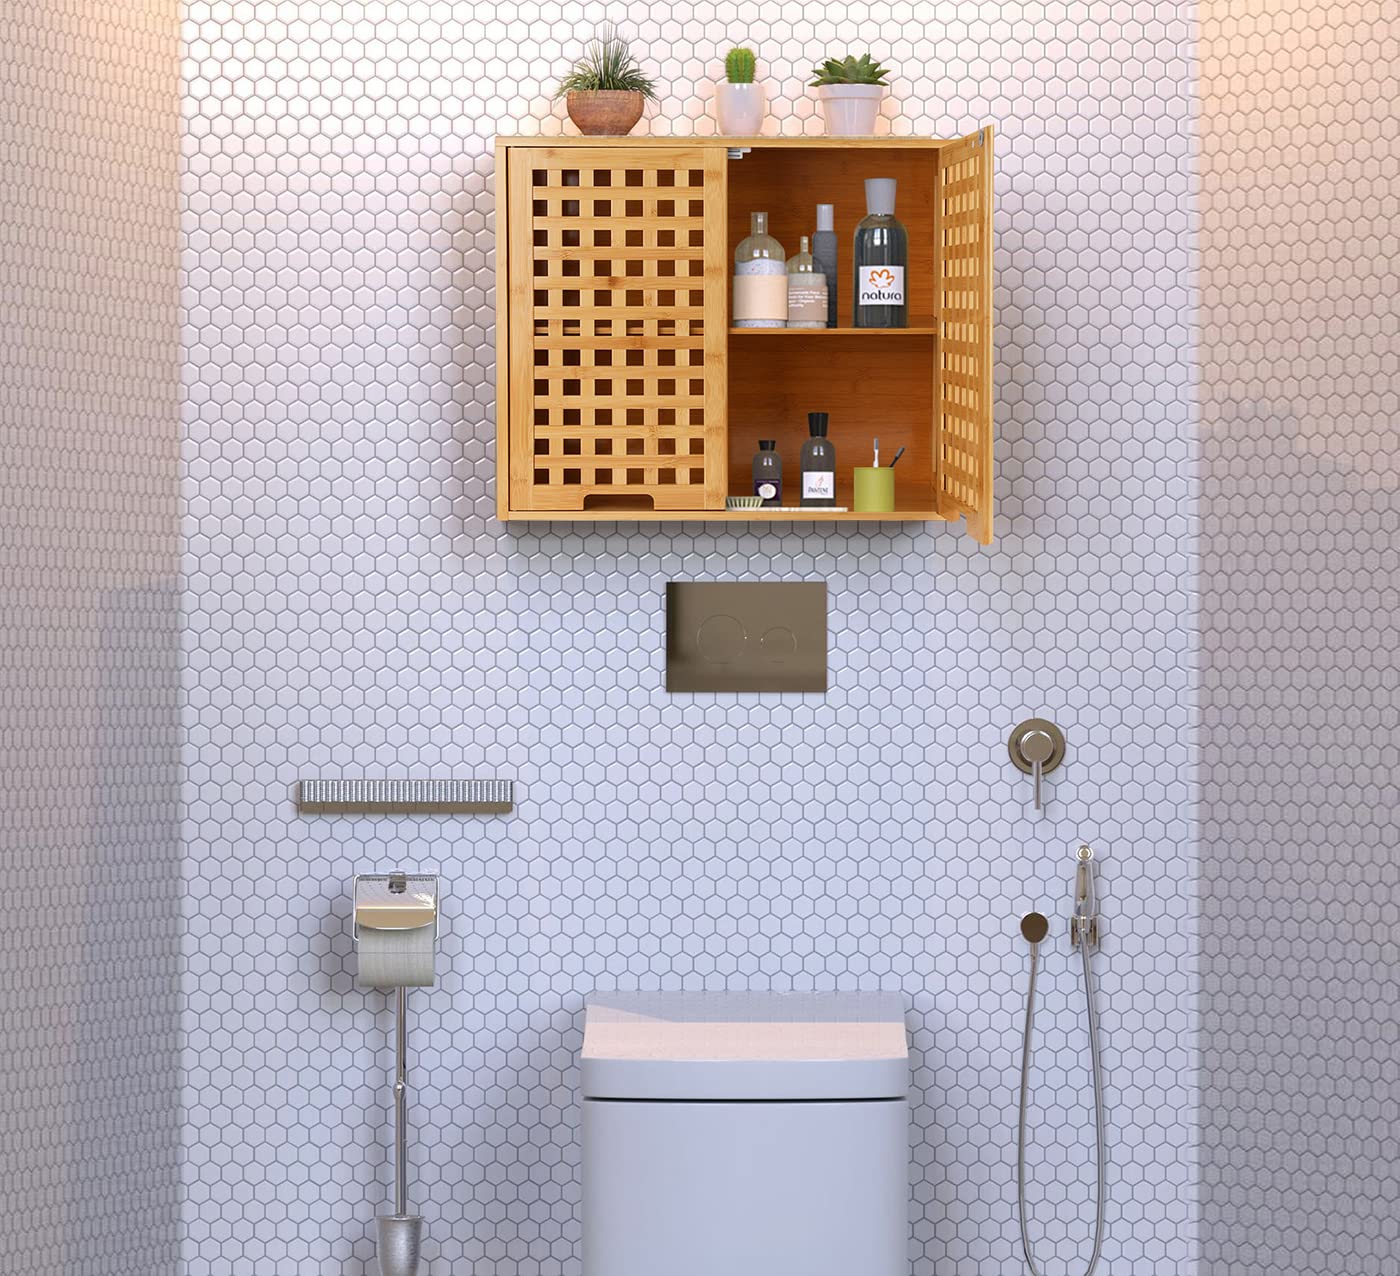 ZYBT Bathroom Wall Cabinet Wall Mounted Organizer, Medicine Cabinet, Over The Toilet Storage, Bamboo Medicine Cabinets with Doors and Shelves, Wall